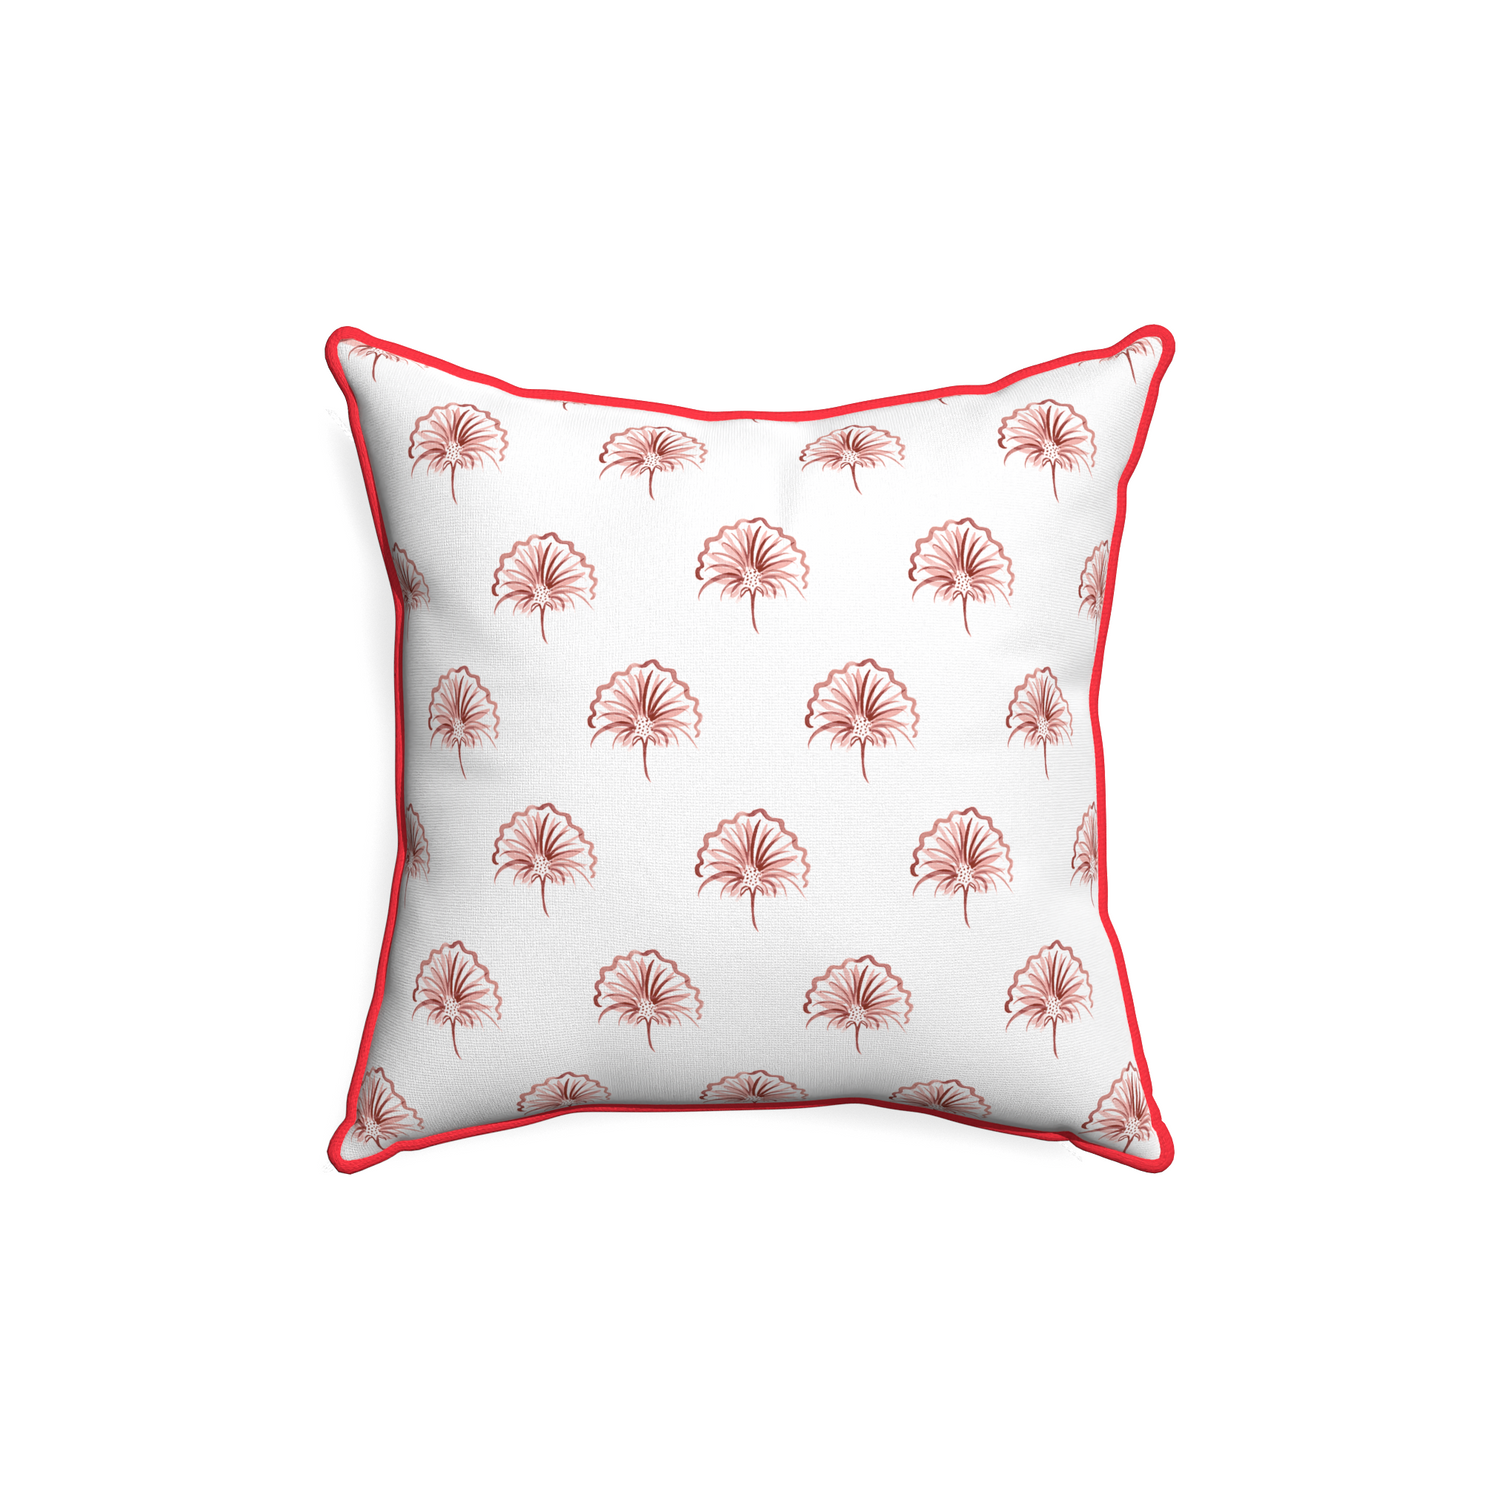 18-square penelope rose custom pillow with cherry piping on white background